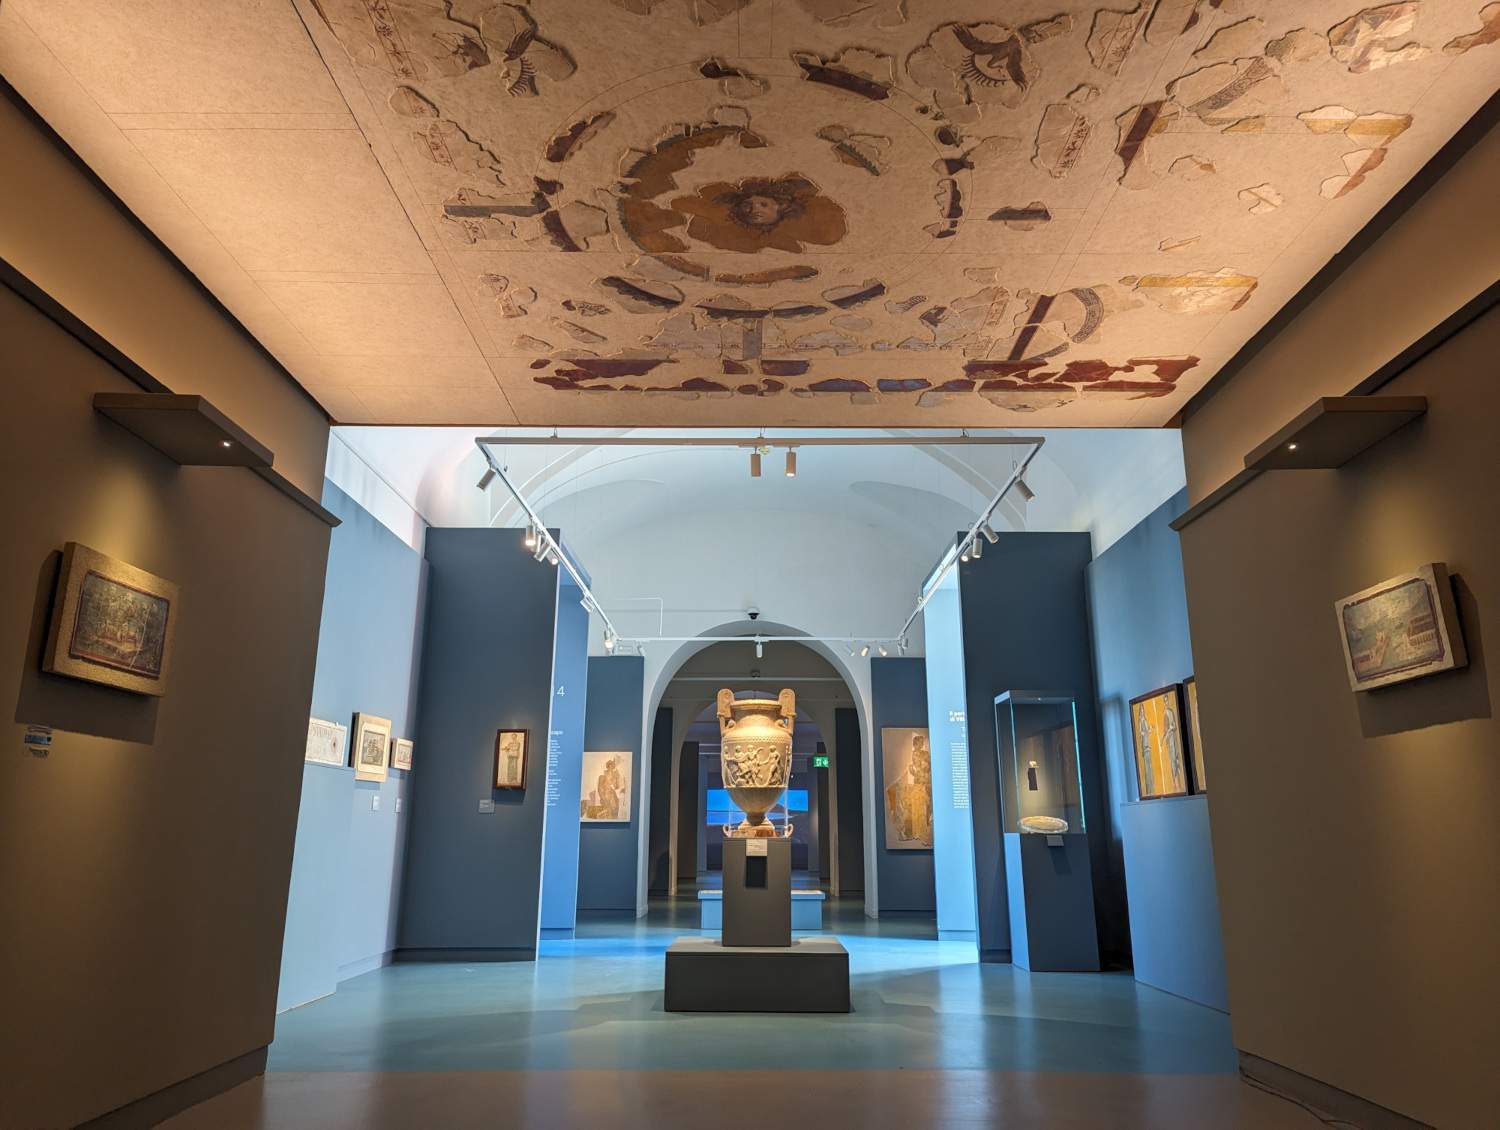 The Stabia Archaeological Museum reopens expanded and with a new layout. Depots can also be visited